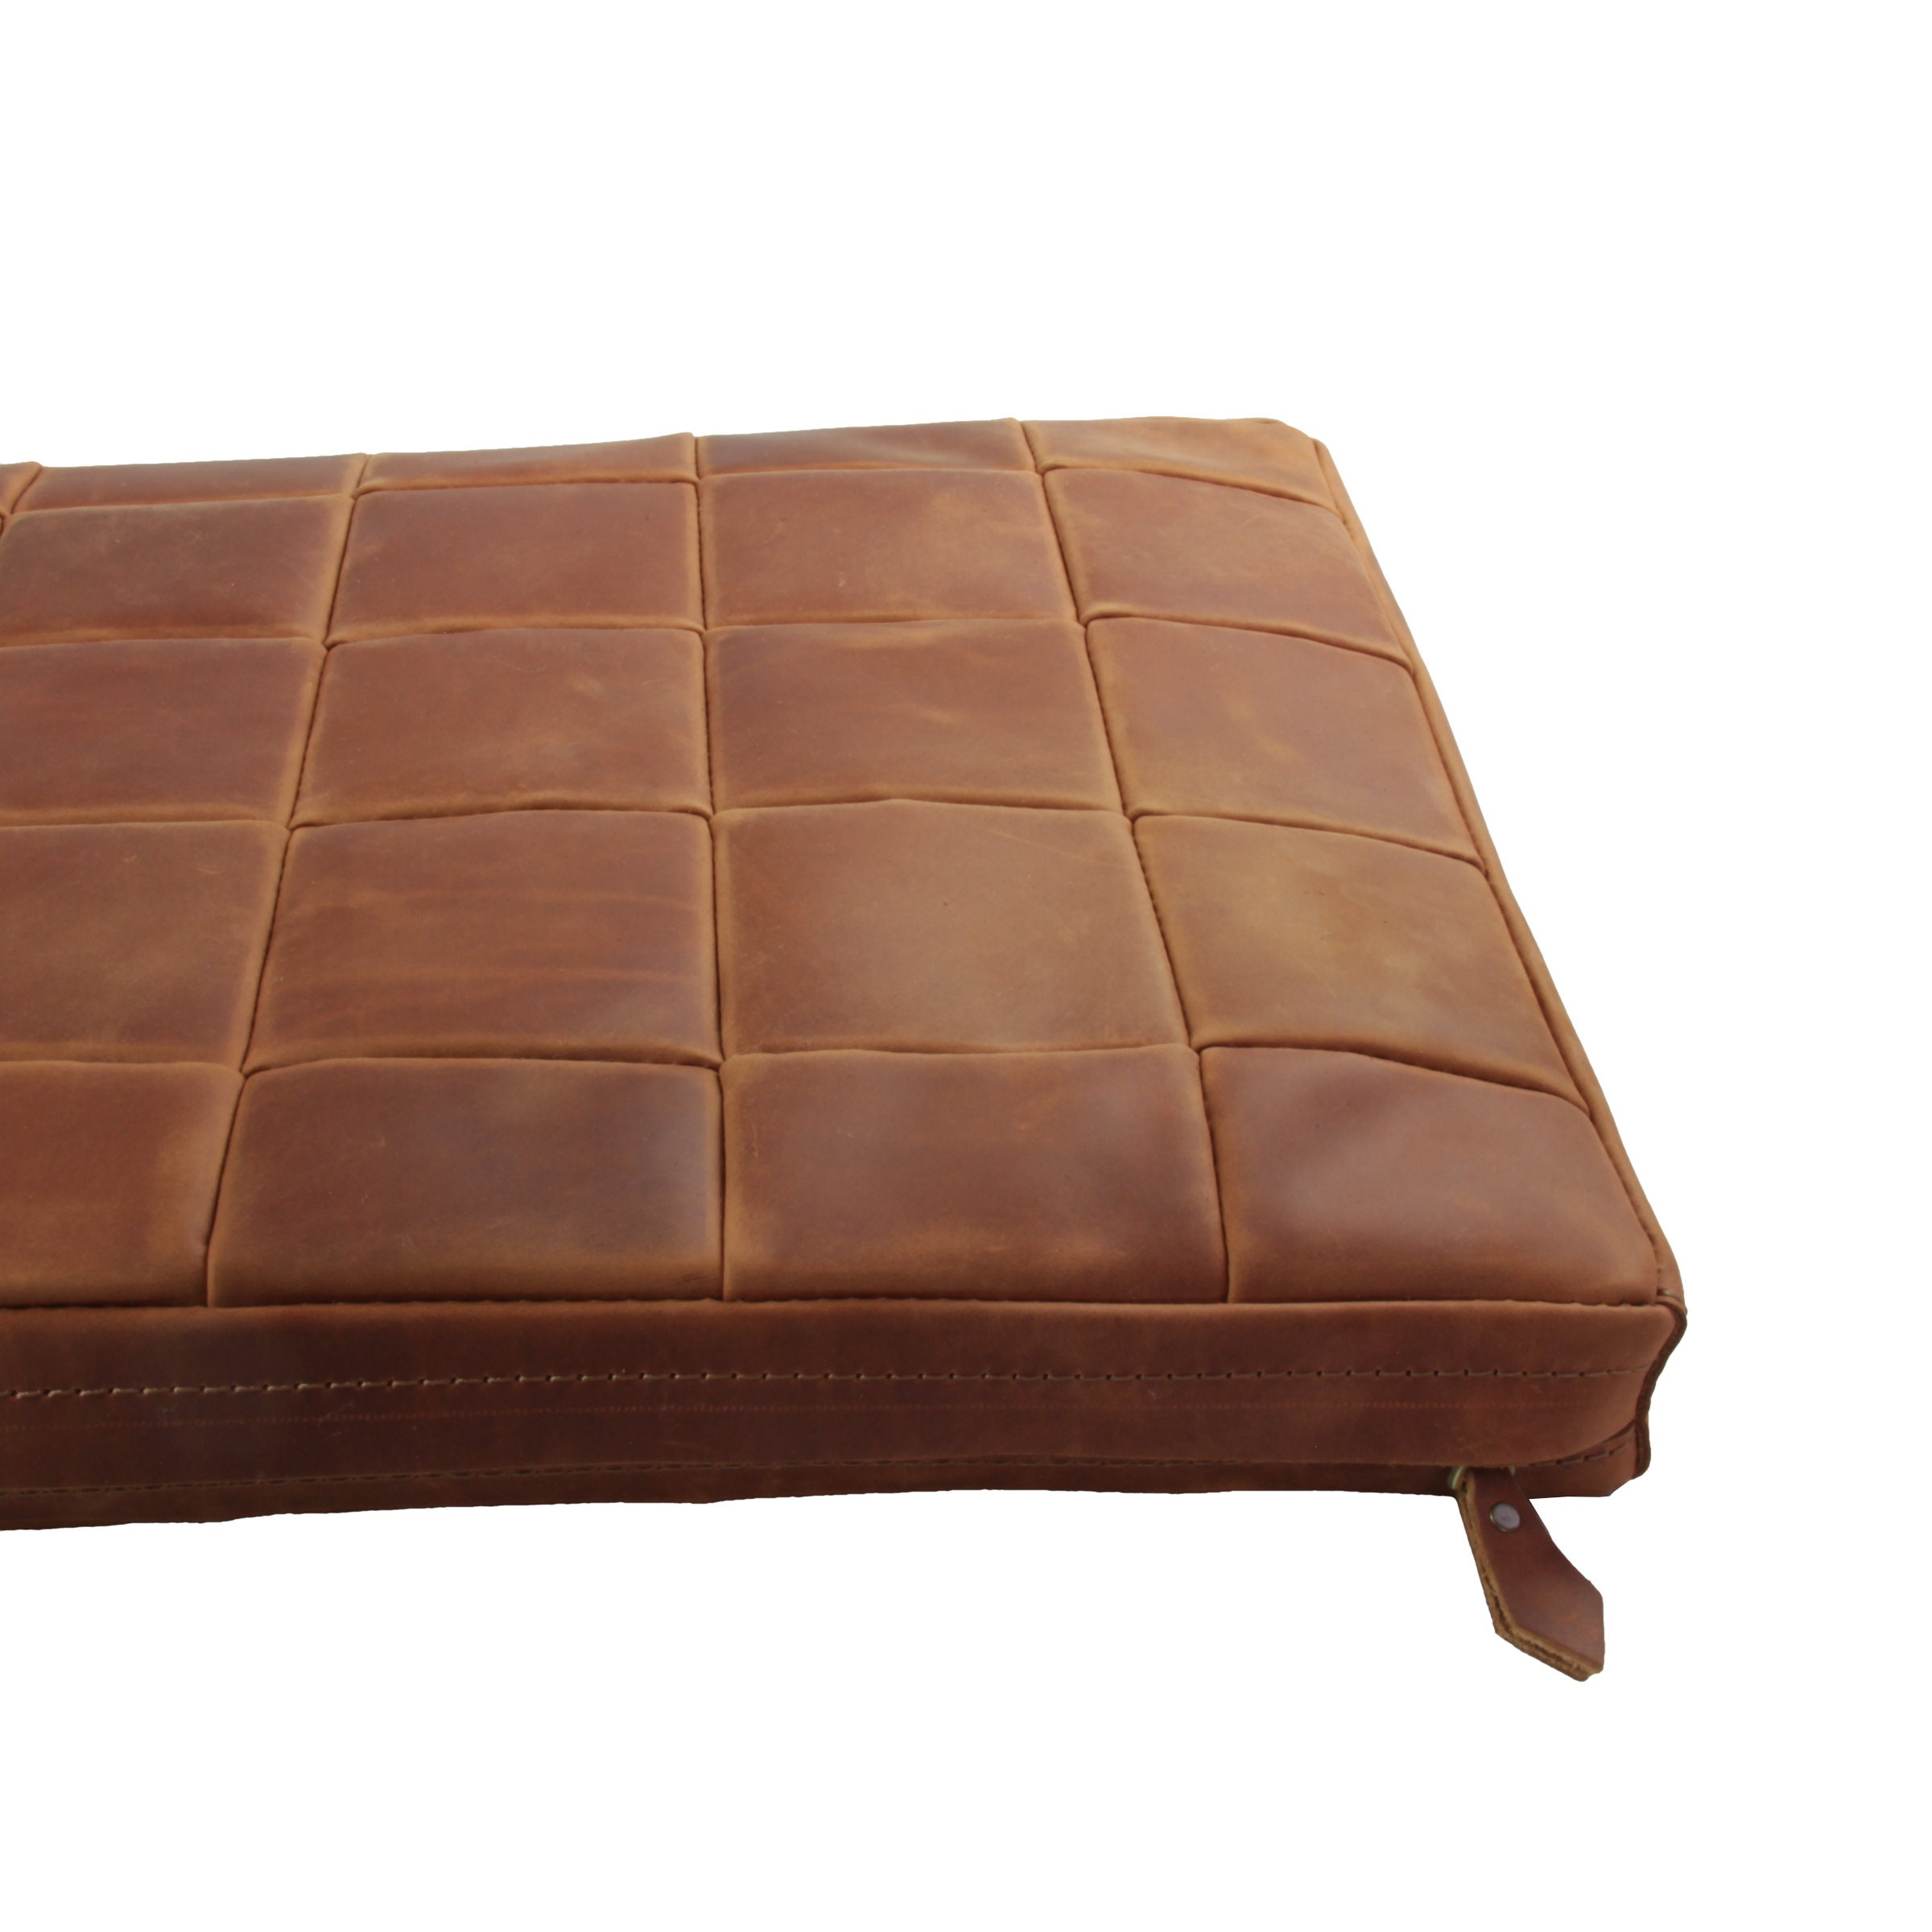 GEX Custom Cushions Size Faux Leather Cushion Seat Cushion for Bench Replacement Cushions Waterproof Couch Cushion Foam Filled